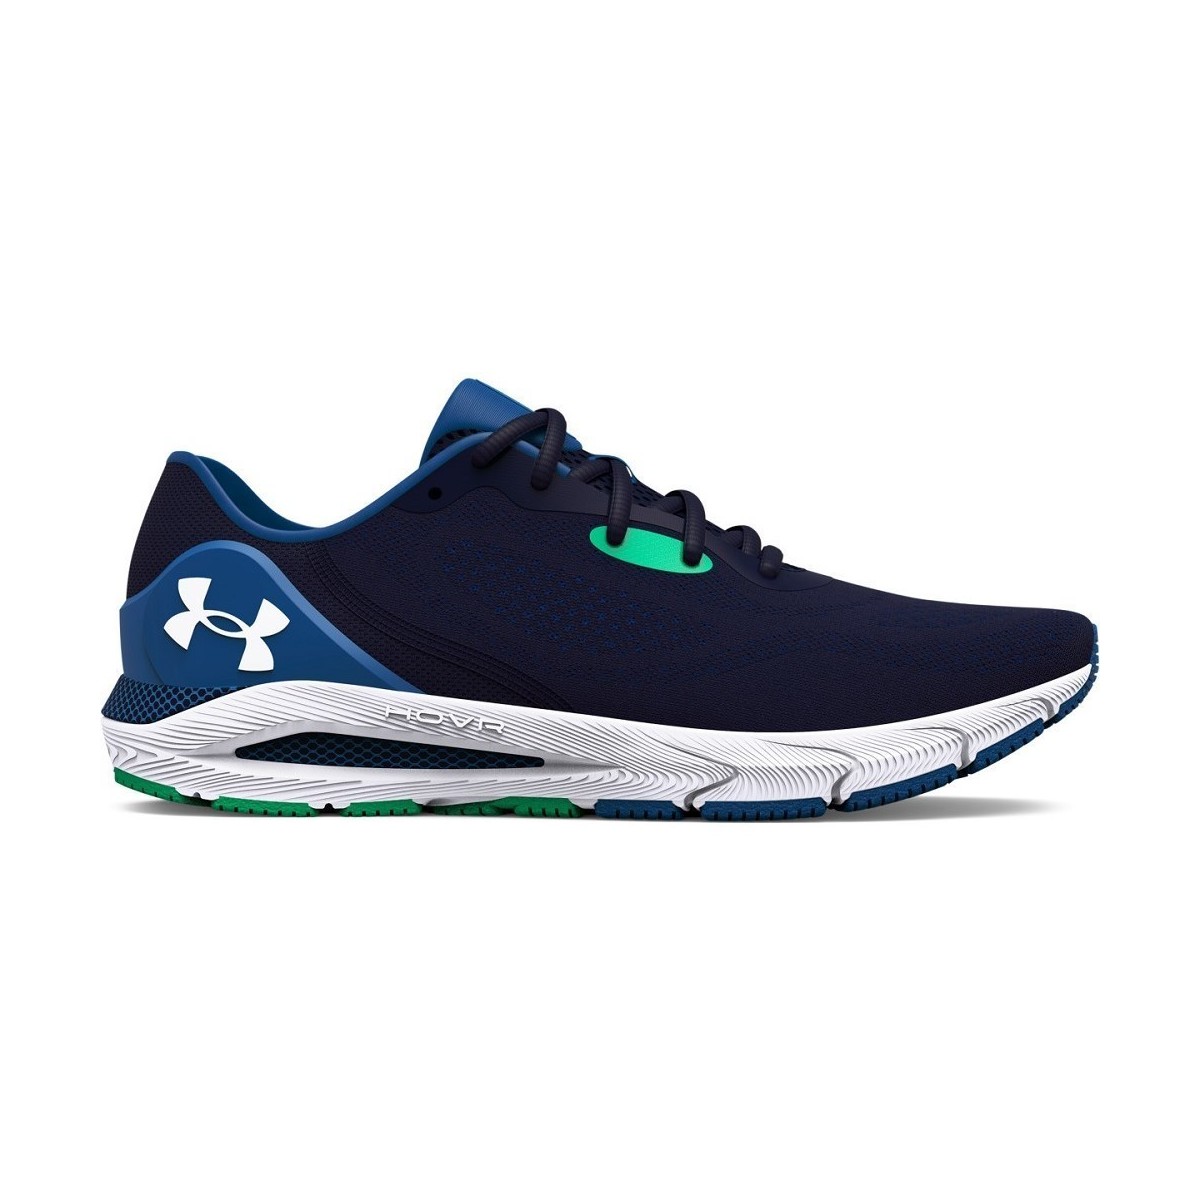 Chaussures Homme Running / trail Under Armour Hovr Sonic 5 Noir